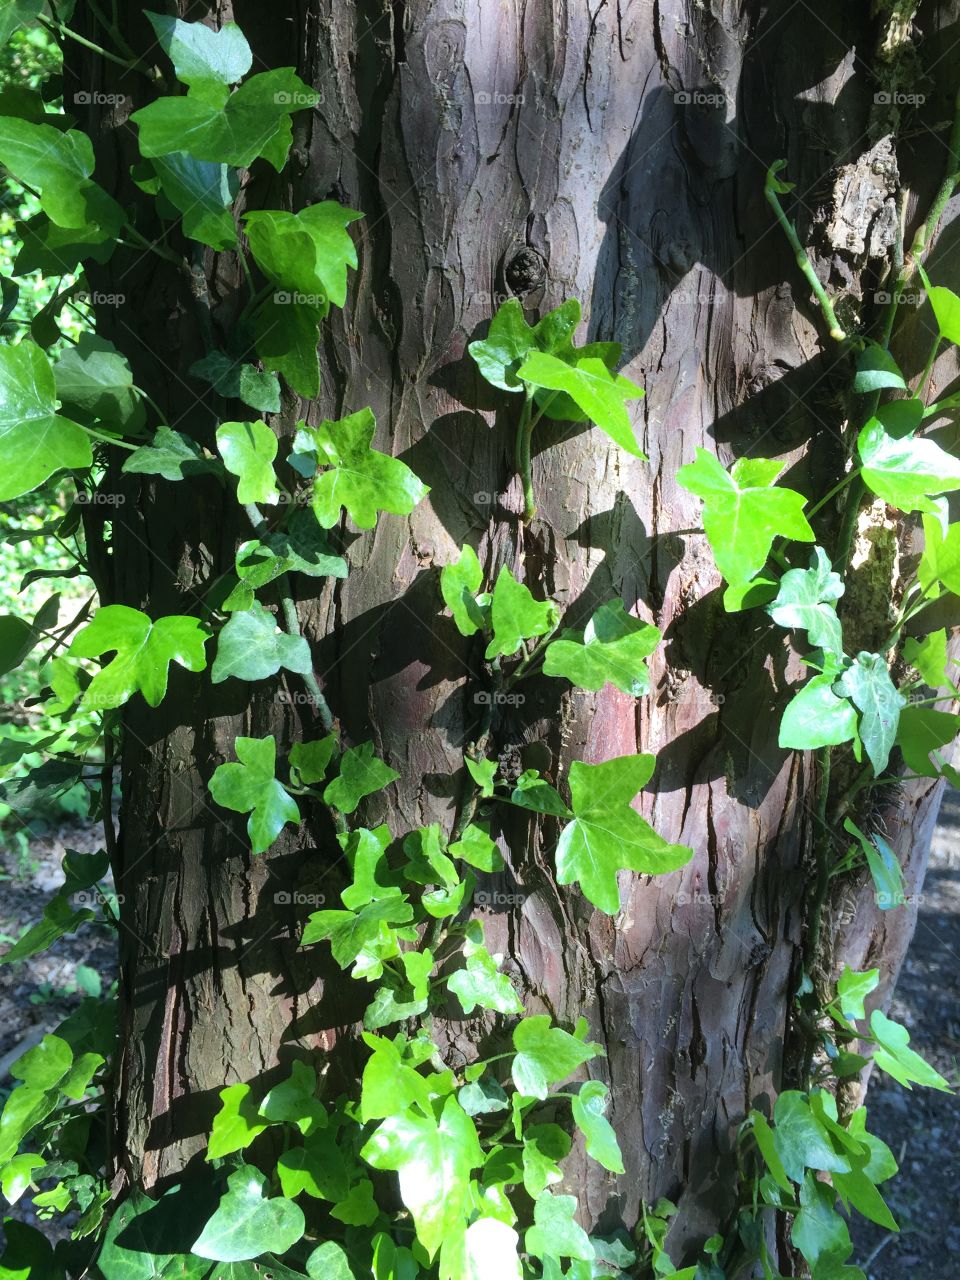 Leaves and ivy on a tree